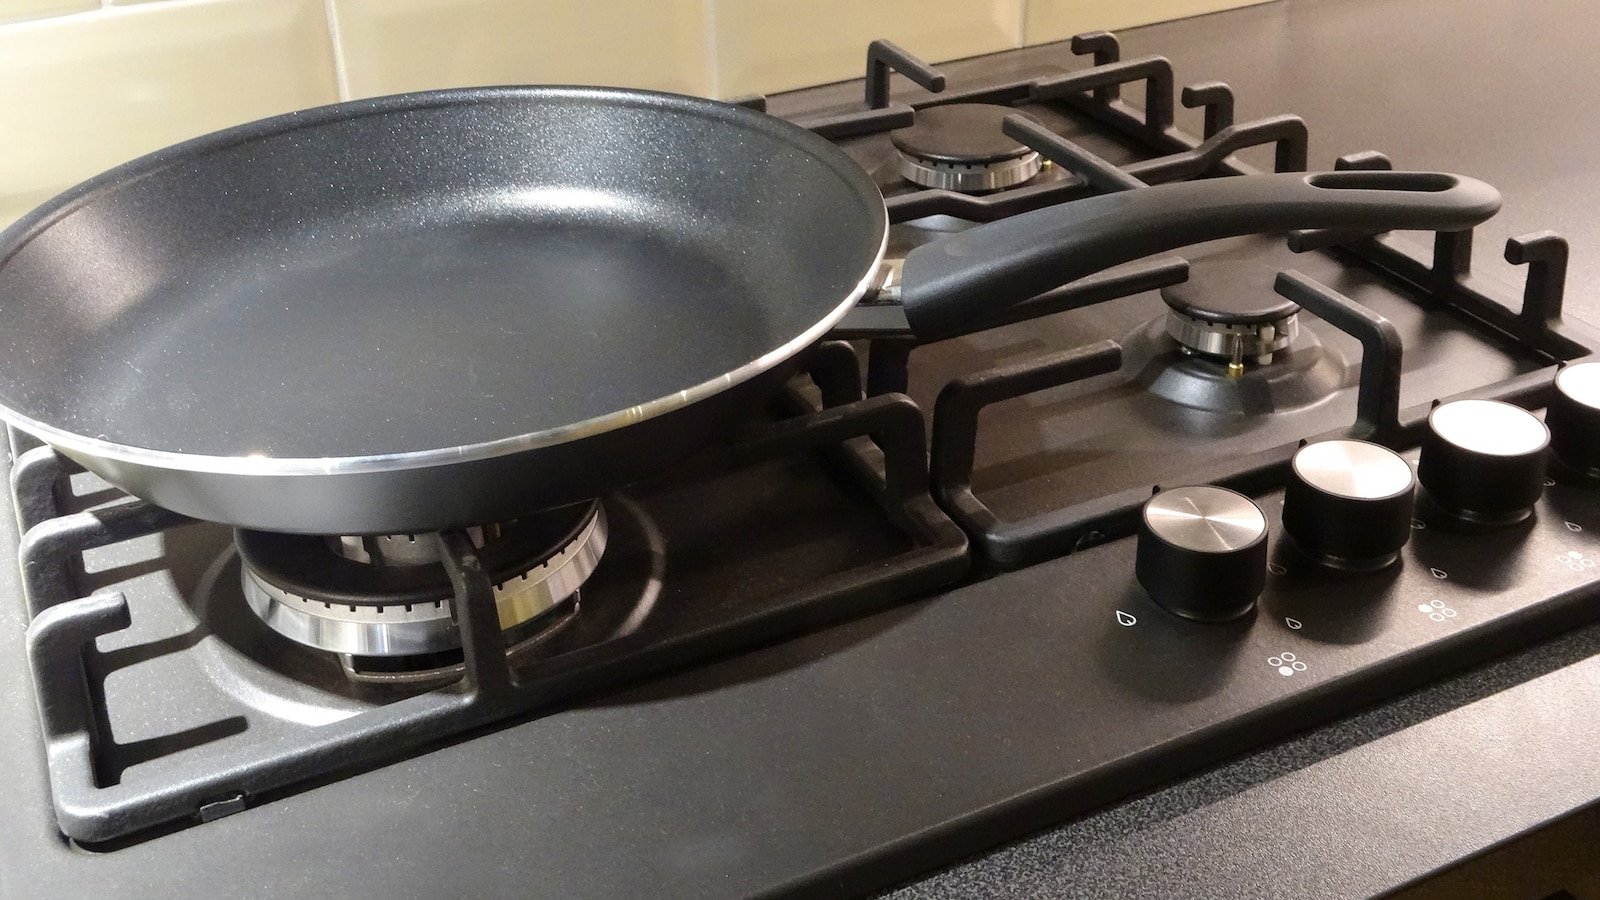 What to know about getting 'Teflon flu' by cooking with nonstick pans